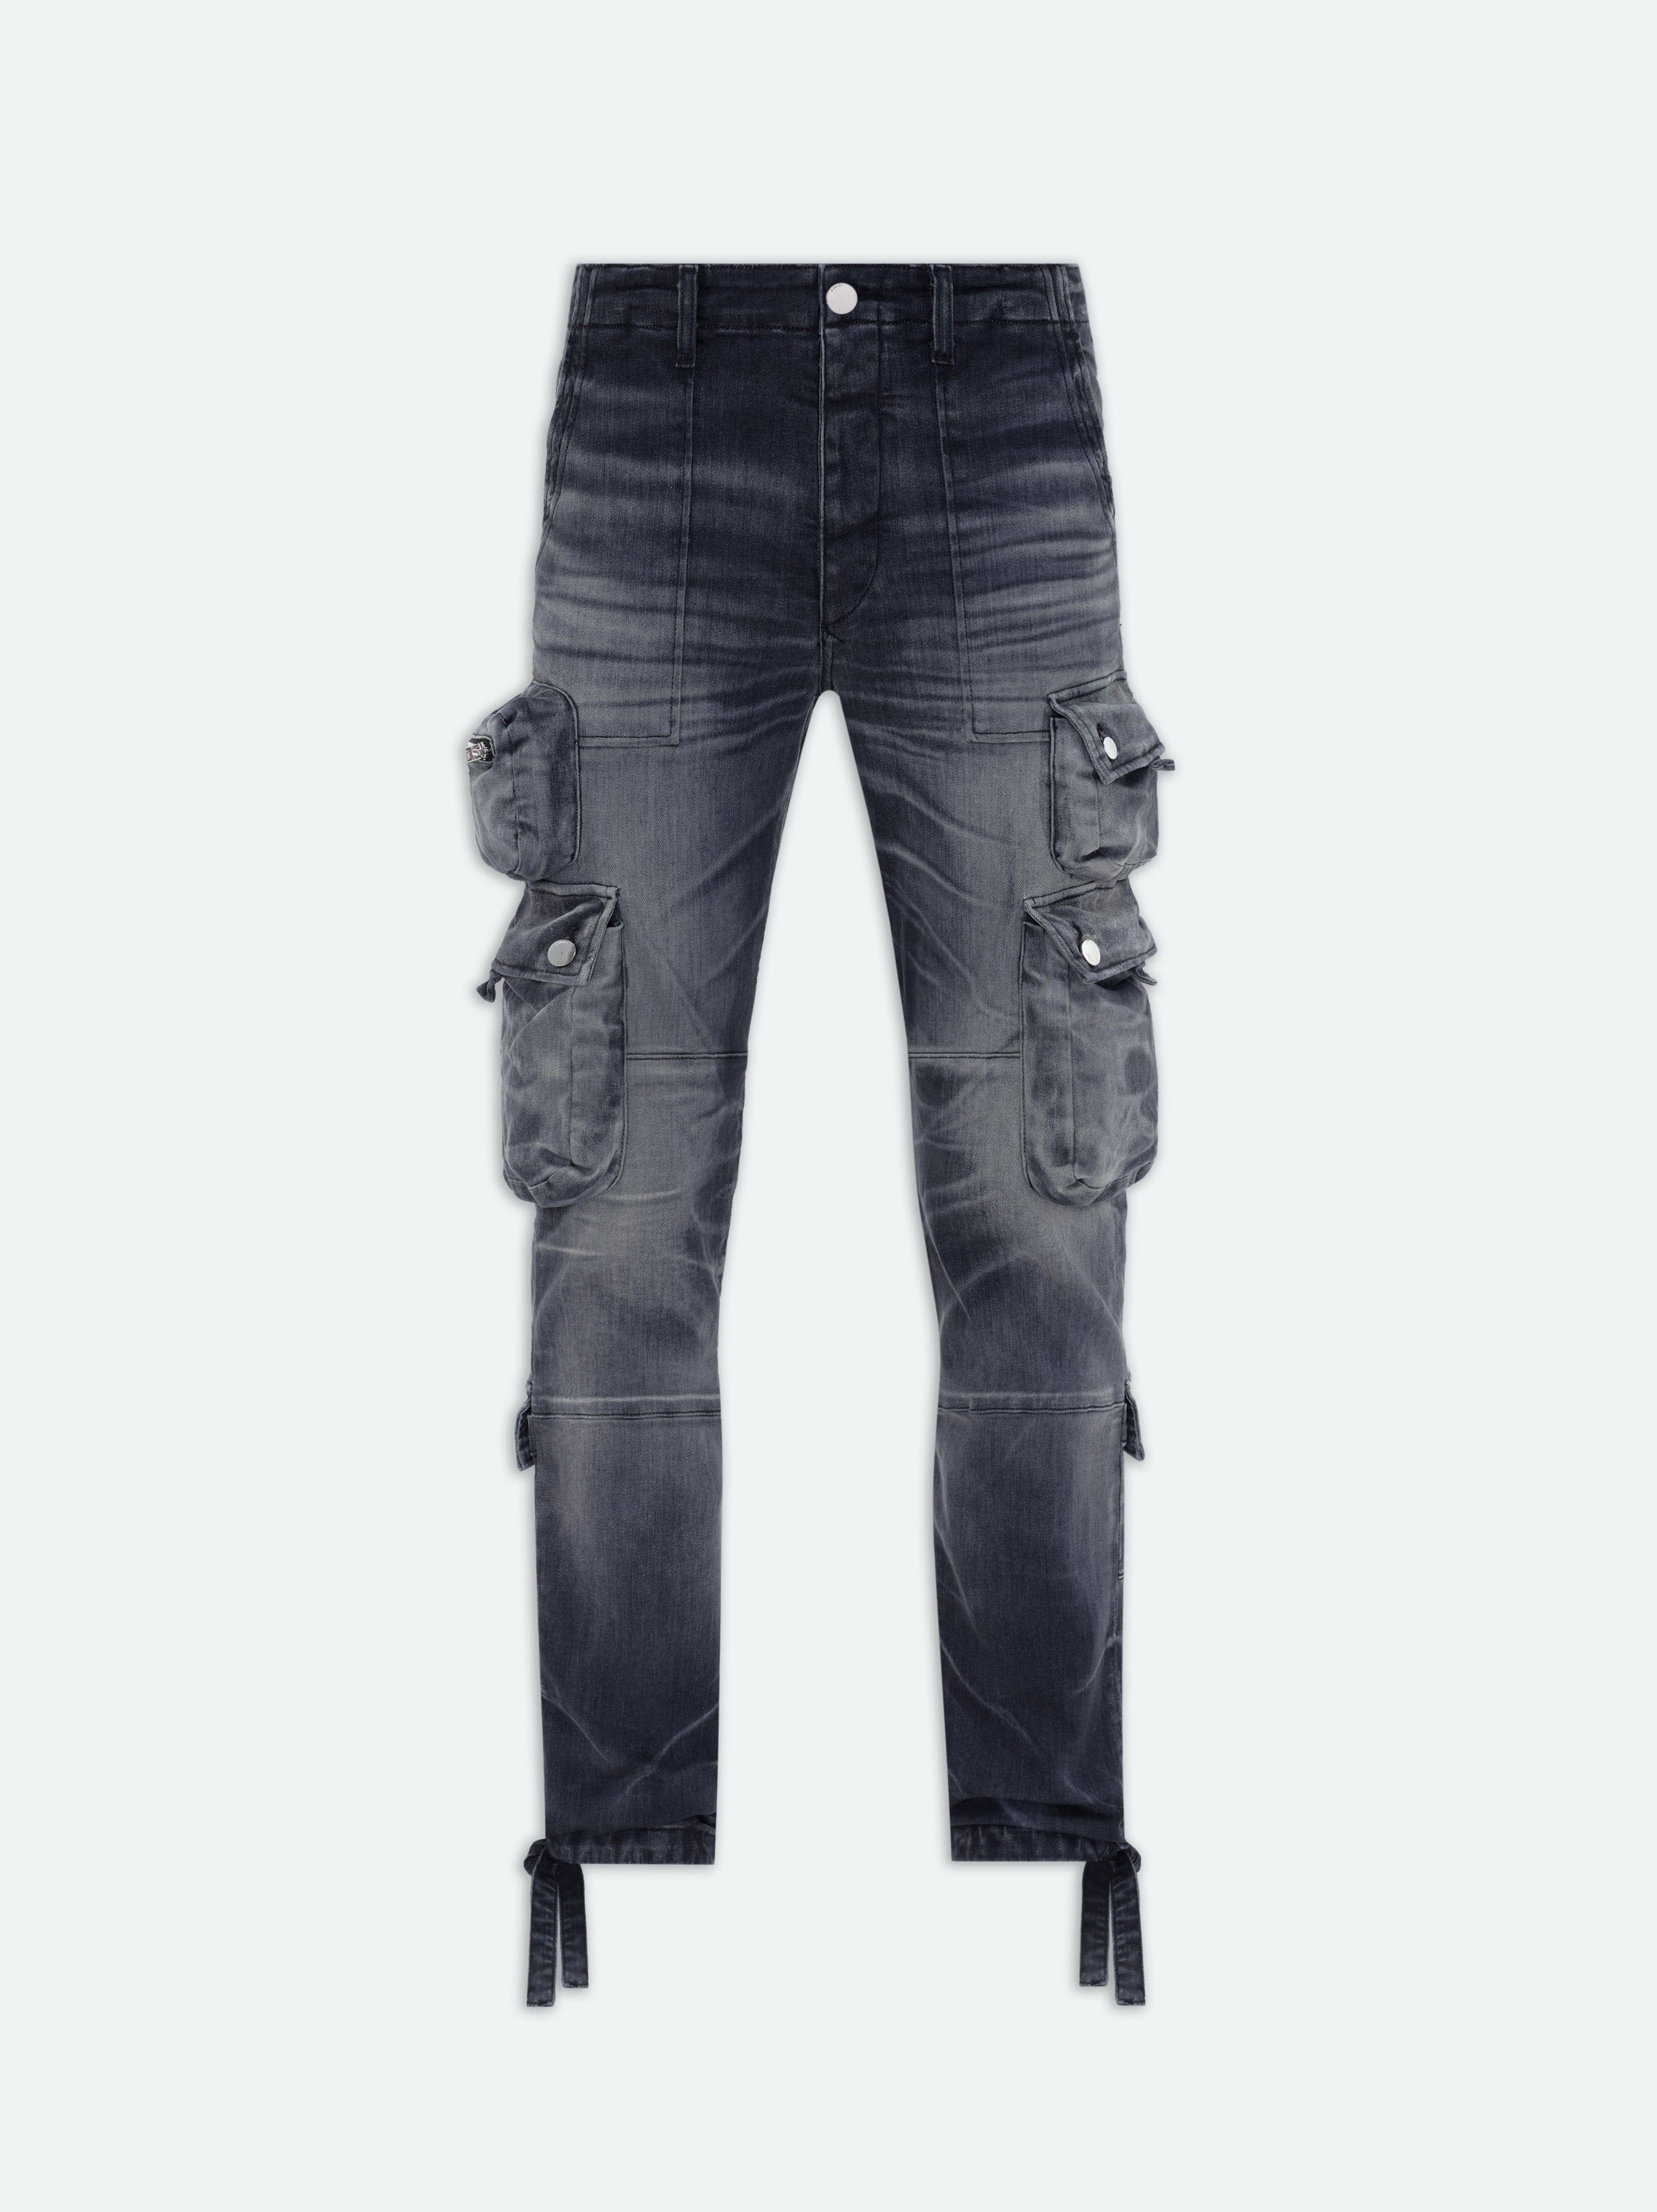 Product TACTICAL CARGO JEAN - Storm Grey featured image